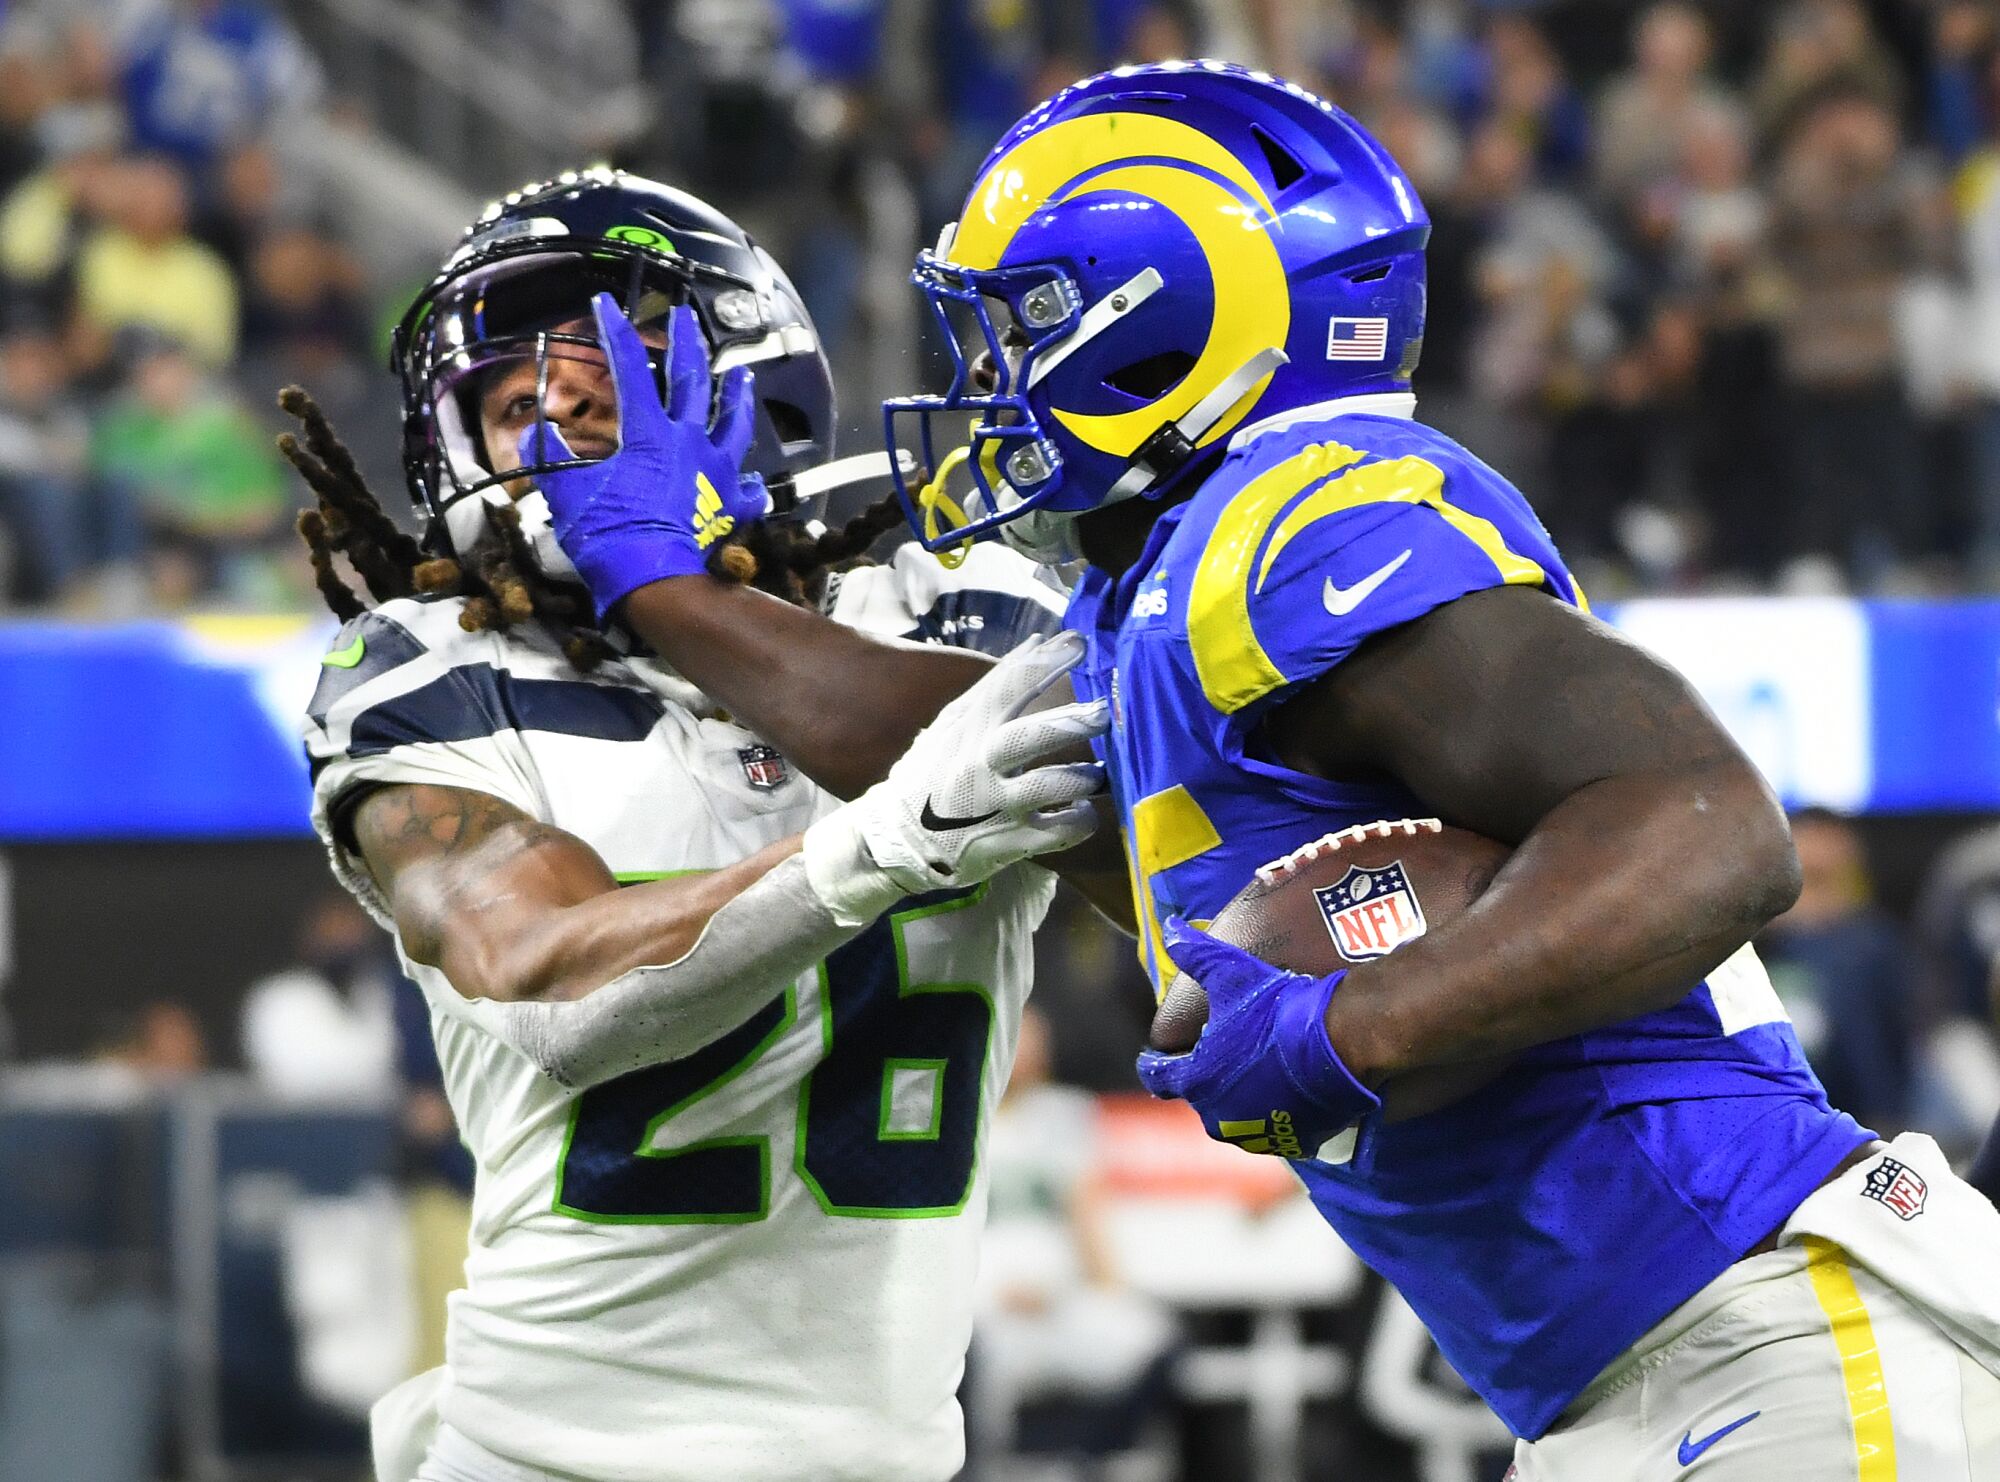 Rams running back Sony Michel stiff-arms Seahawks safety Rayan Neal during a big gain.